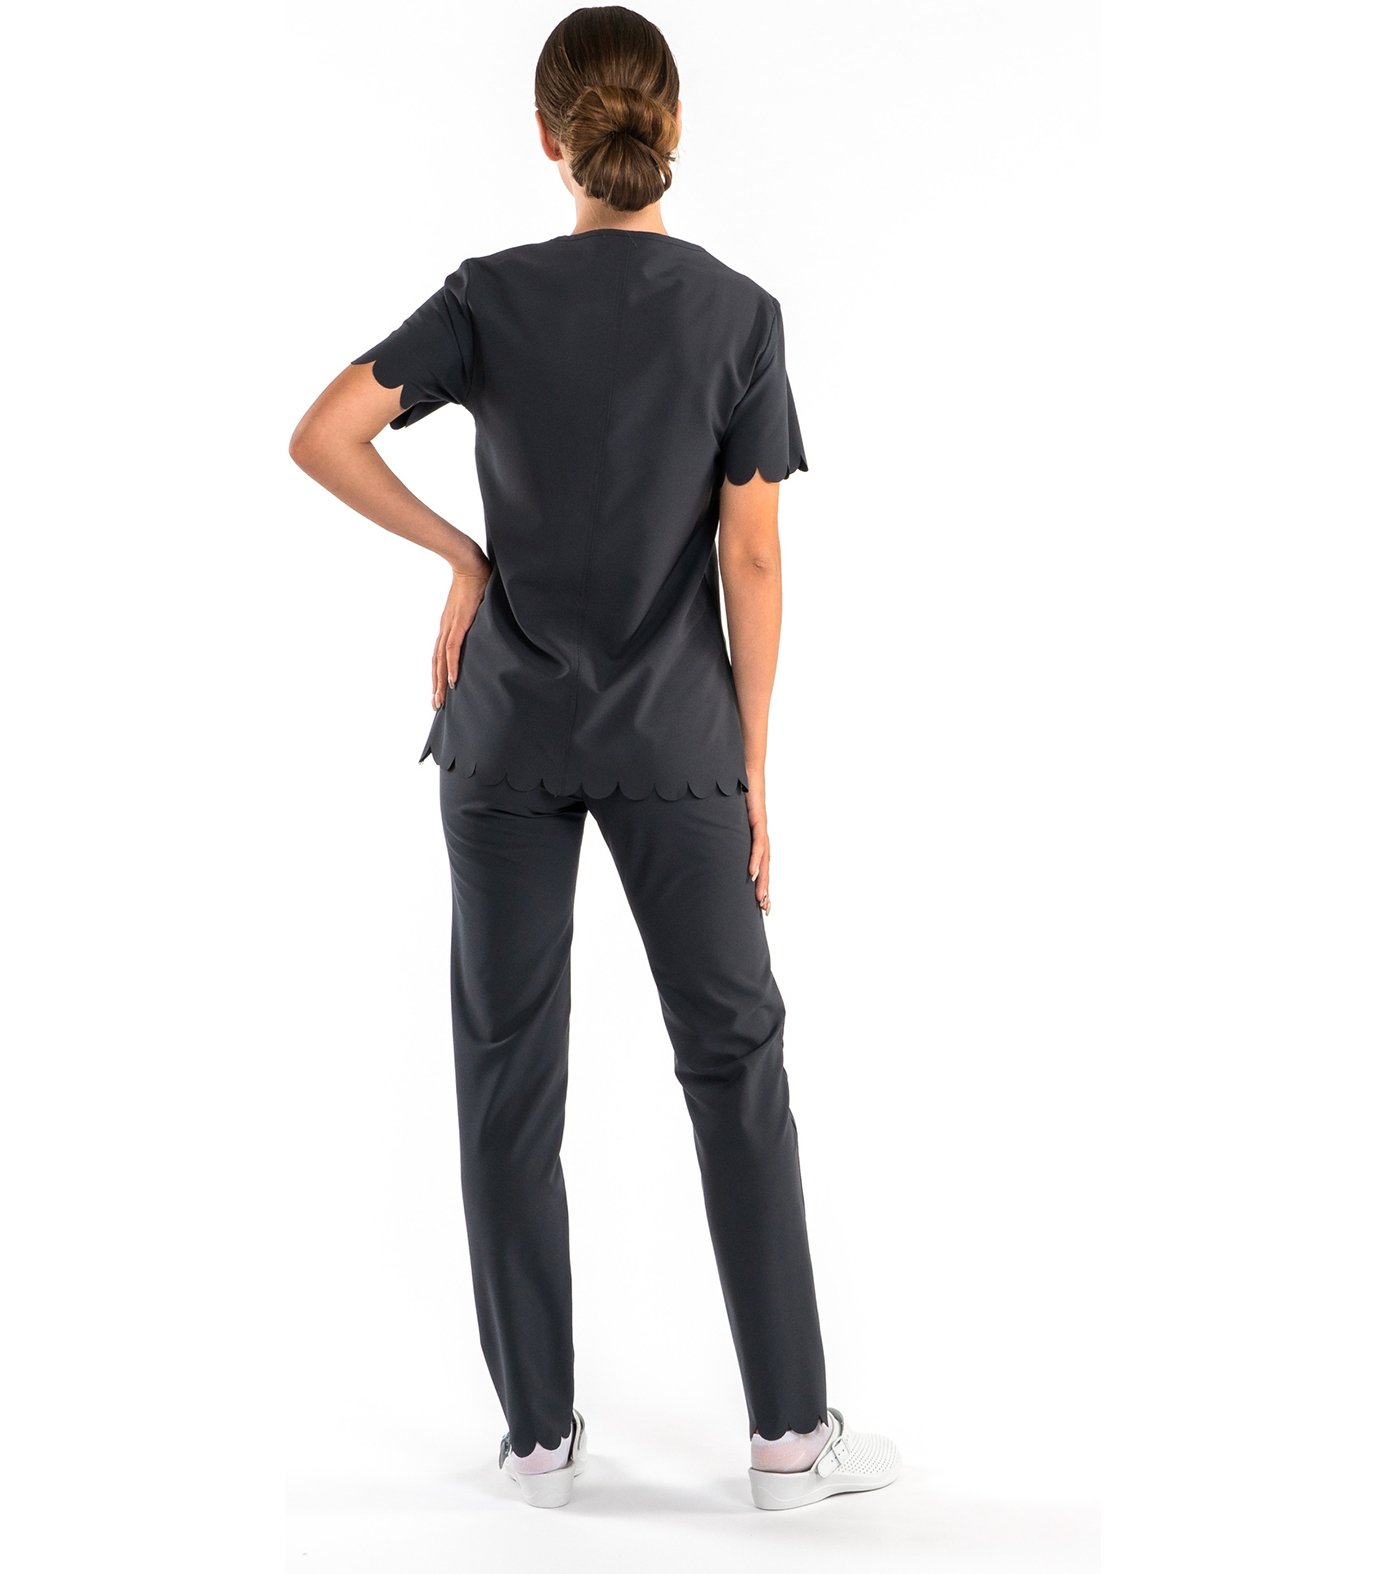 Worked In Women's Scrub Top & Pants Scalloped Scrub Set SP203A_SP203B